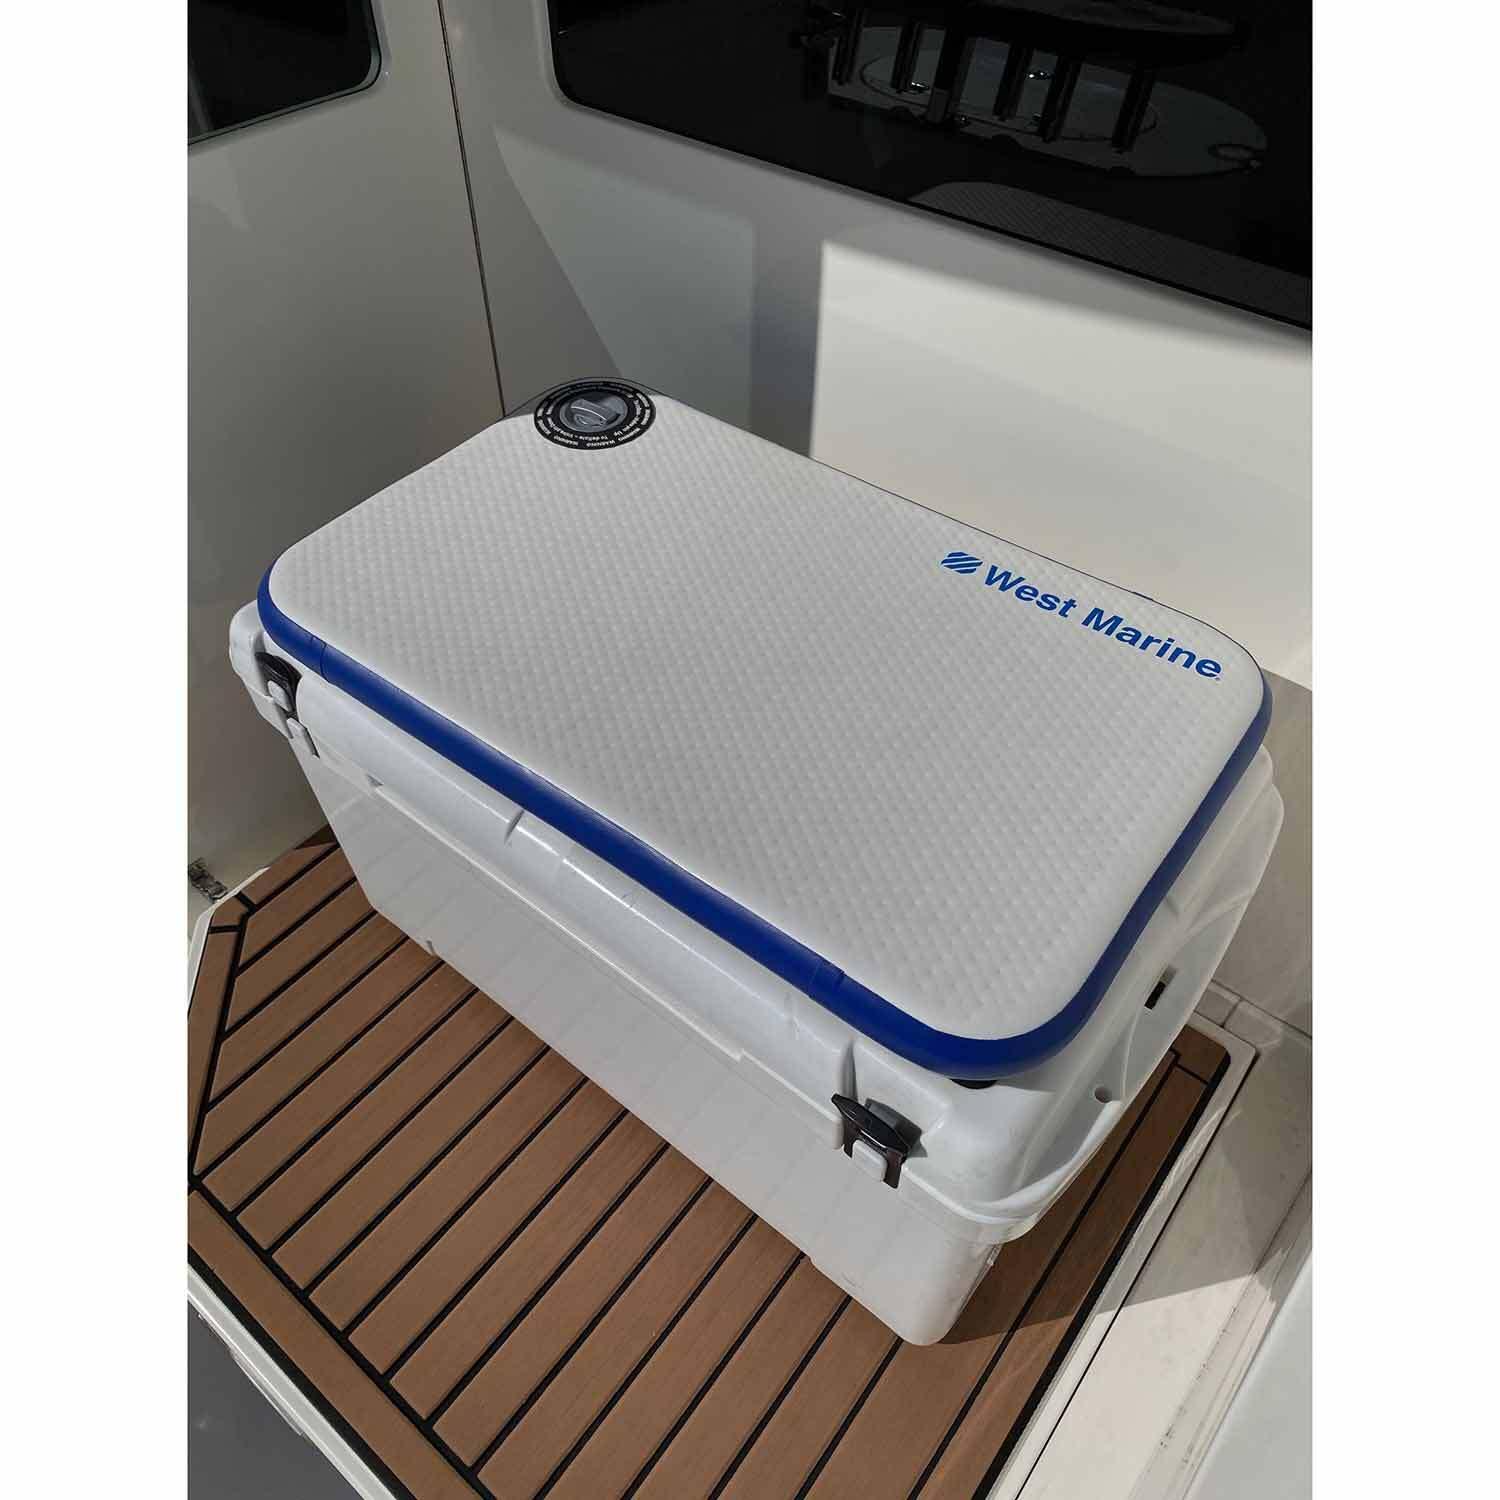 Cooler Seat Cushion, Boat Cushion. Made With Seaquest Marine Pleated Vinyl.